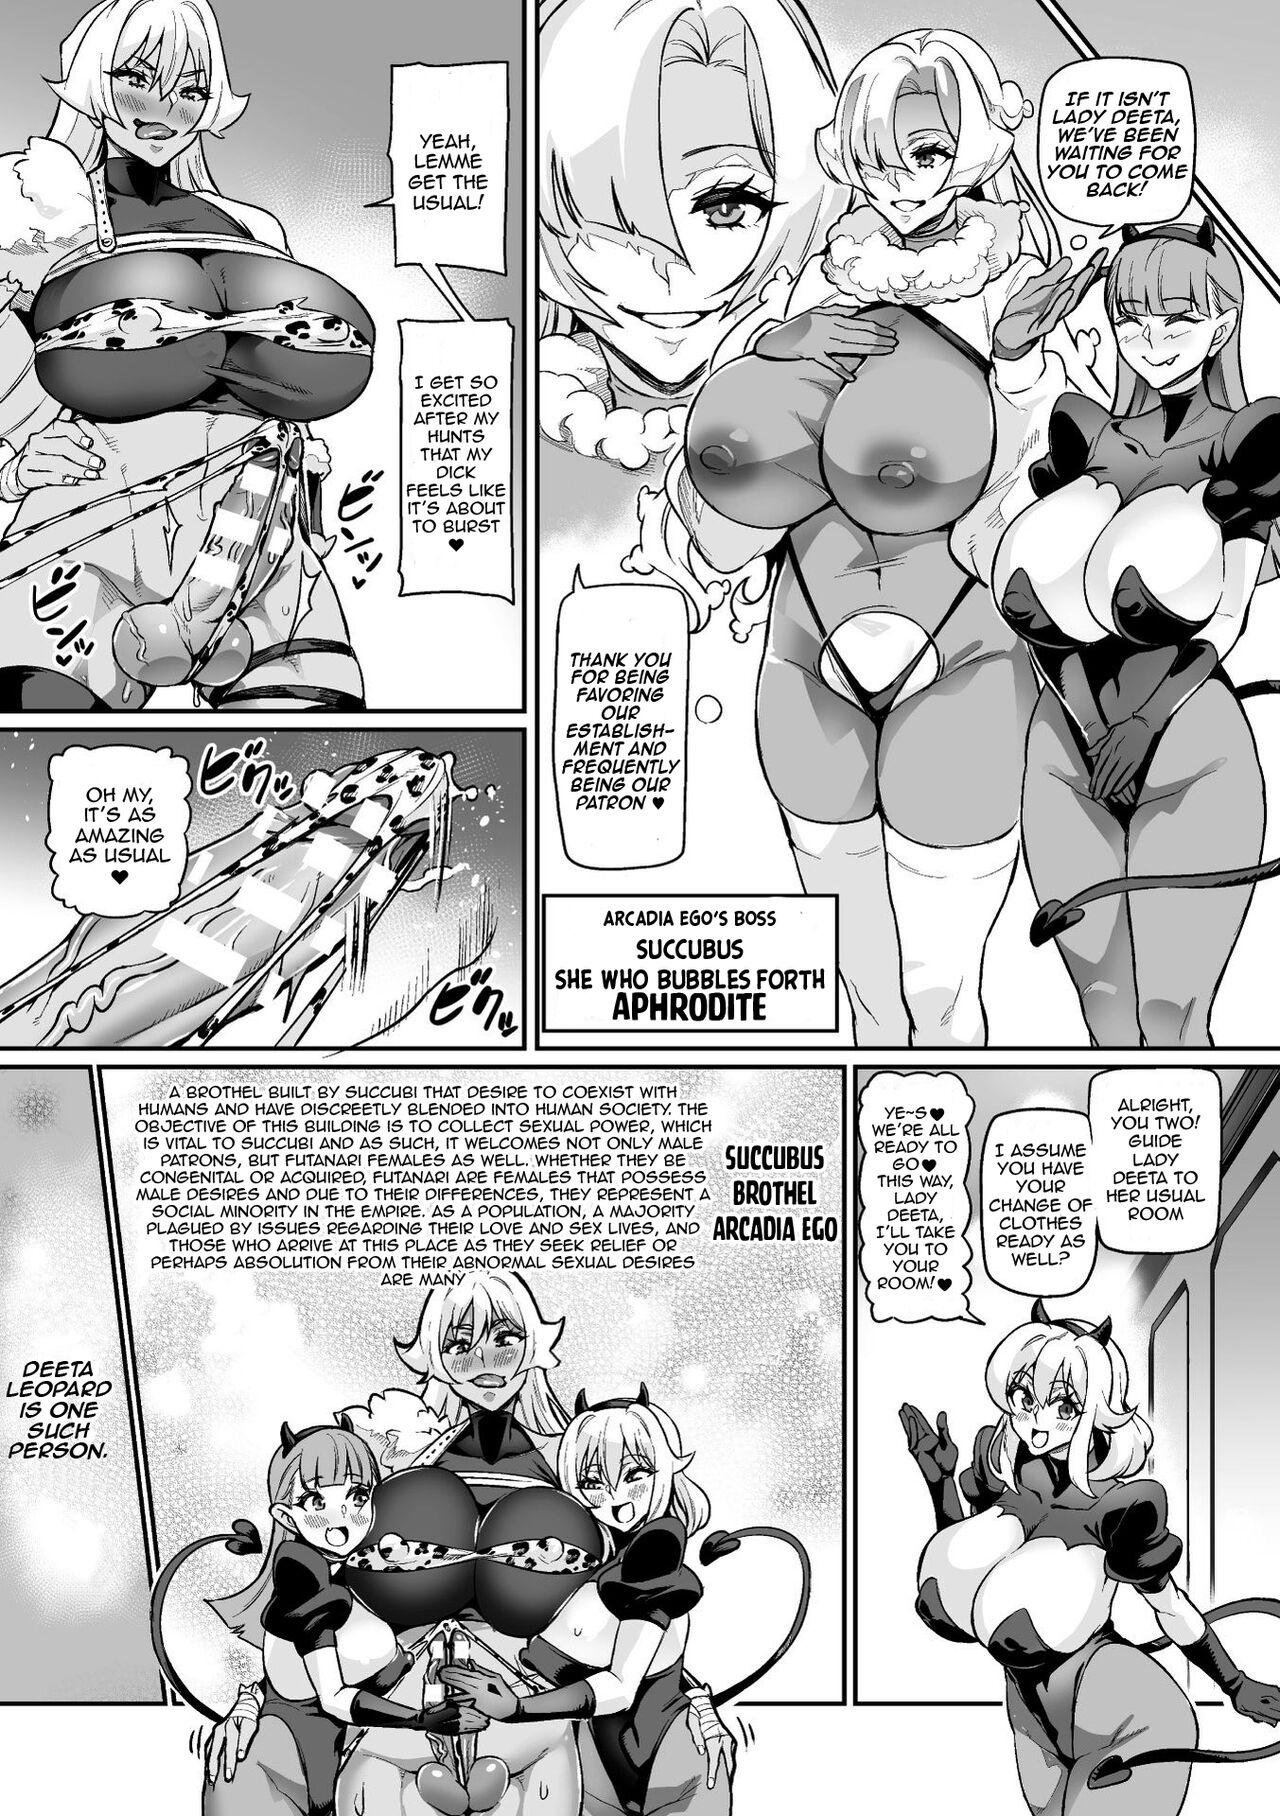 Hardcore Youkoso! Inma Shoukan Arcadia Ego Ch. 1 / Welcome to the Succubus Brothel Arcadia Ego Ch.1 Scandal - Page 8